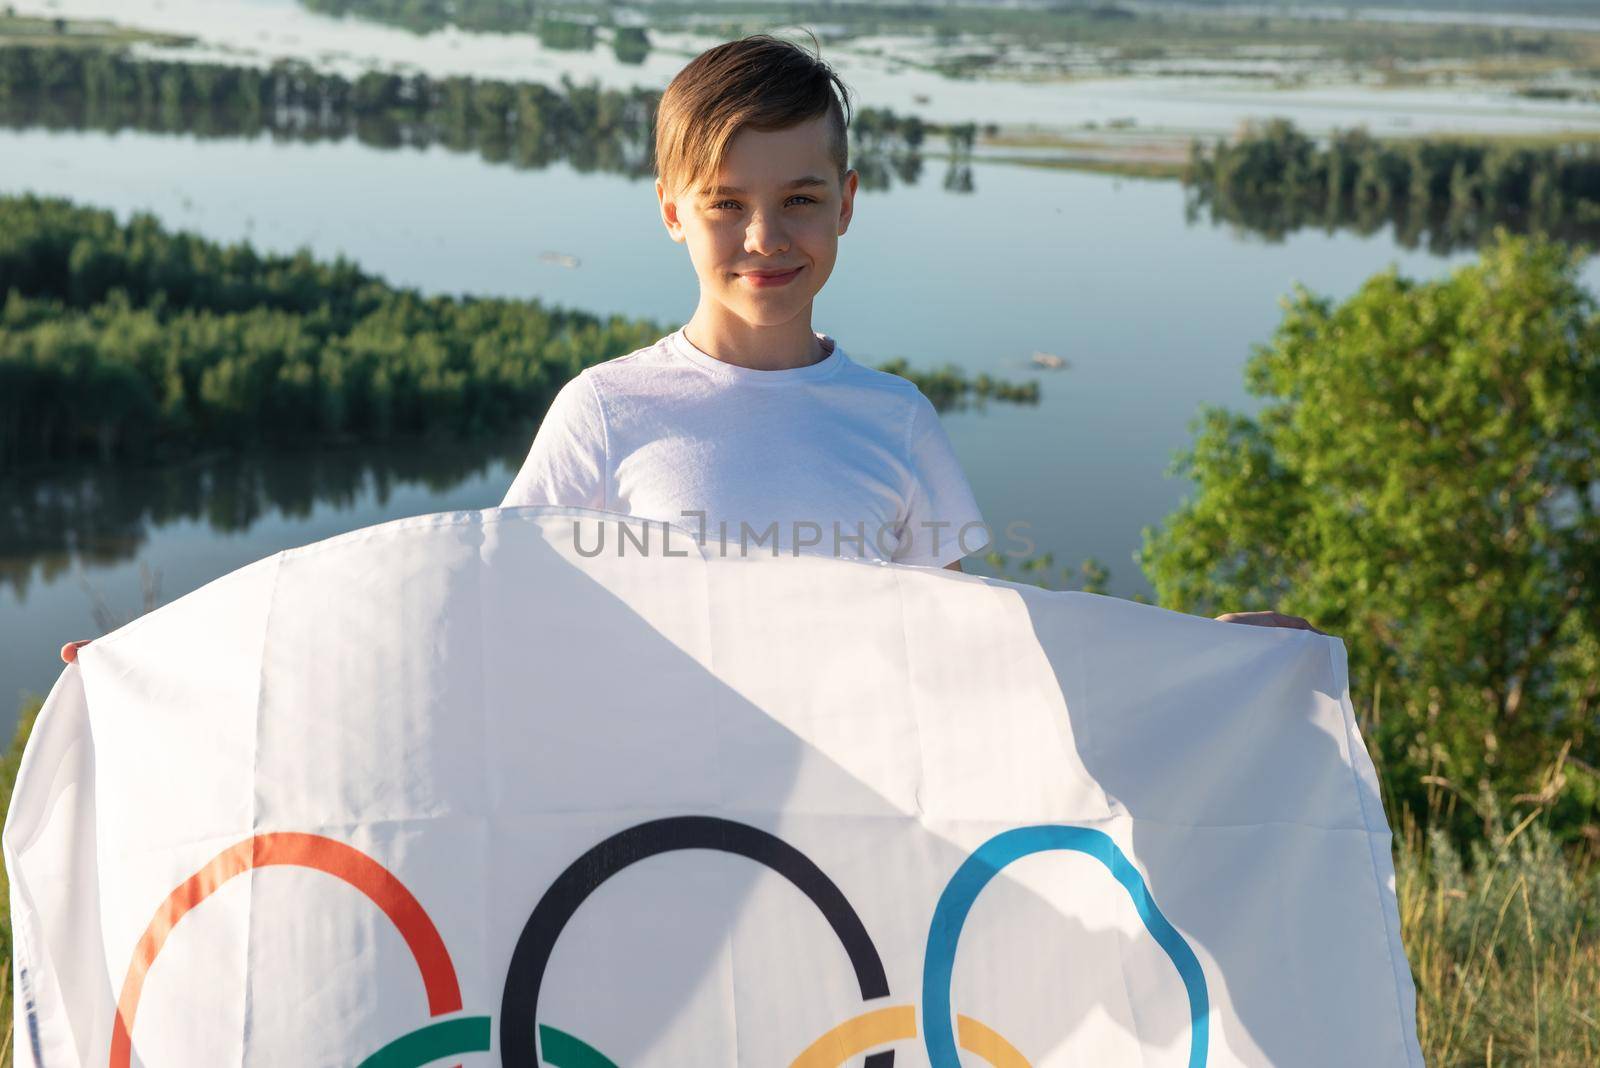 Portrait of boy waving flag the Olympic Games outdoors over cloudy sunset sky. Children sports fan. Summer olympic games concept. 08.06.2021, Barnaul Russia.